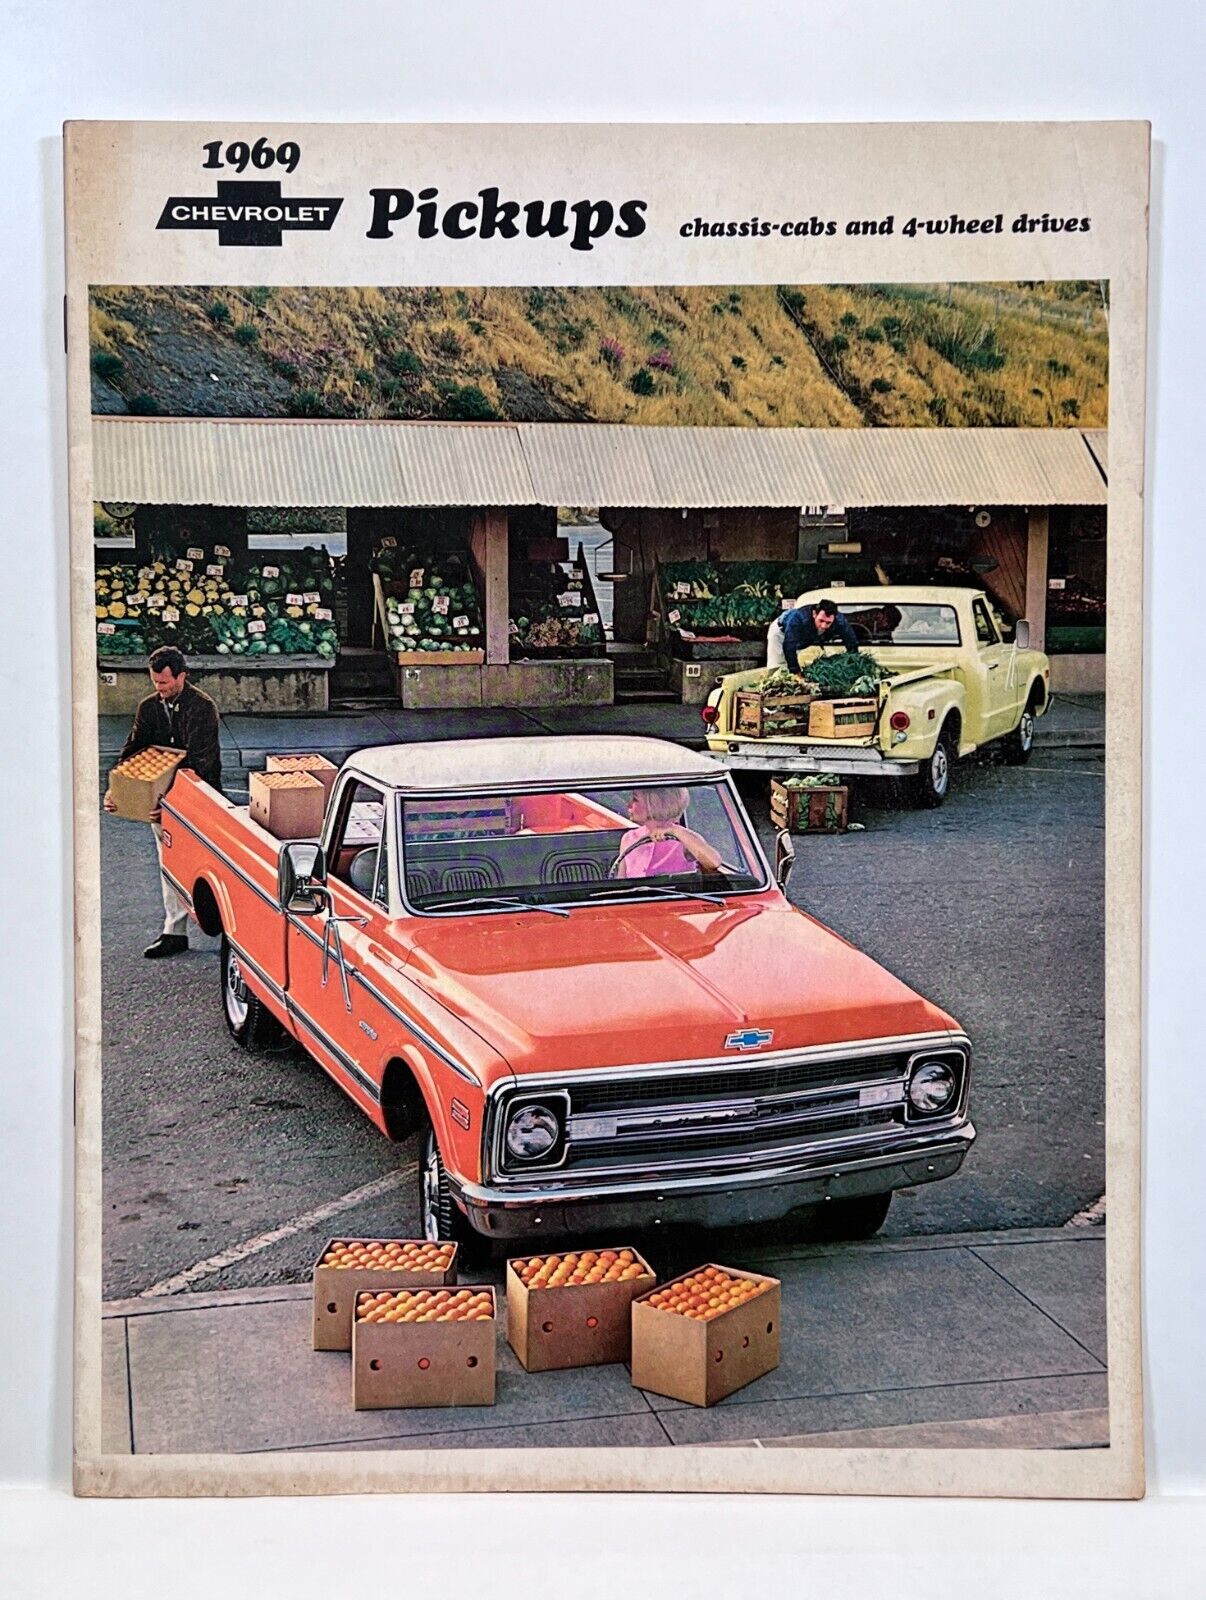 Vintage 1969 Chevrolet Pickups Chassis Cab 4-Wheel Drives Chevy Sales Brochure